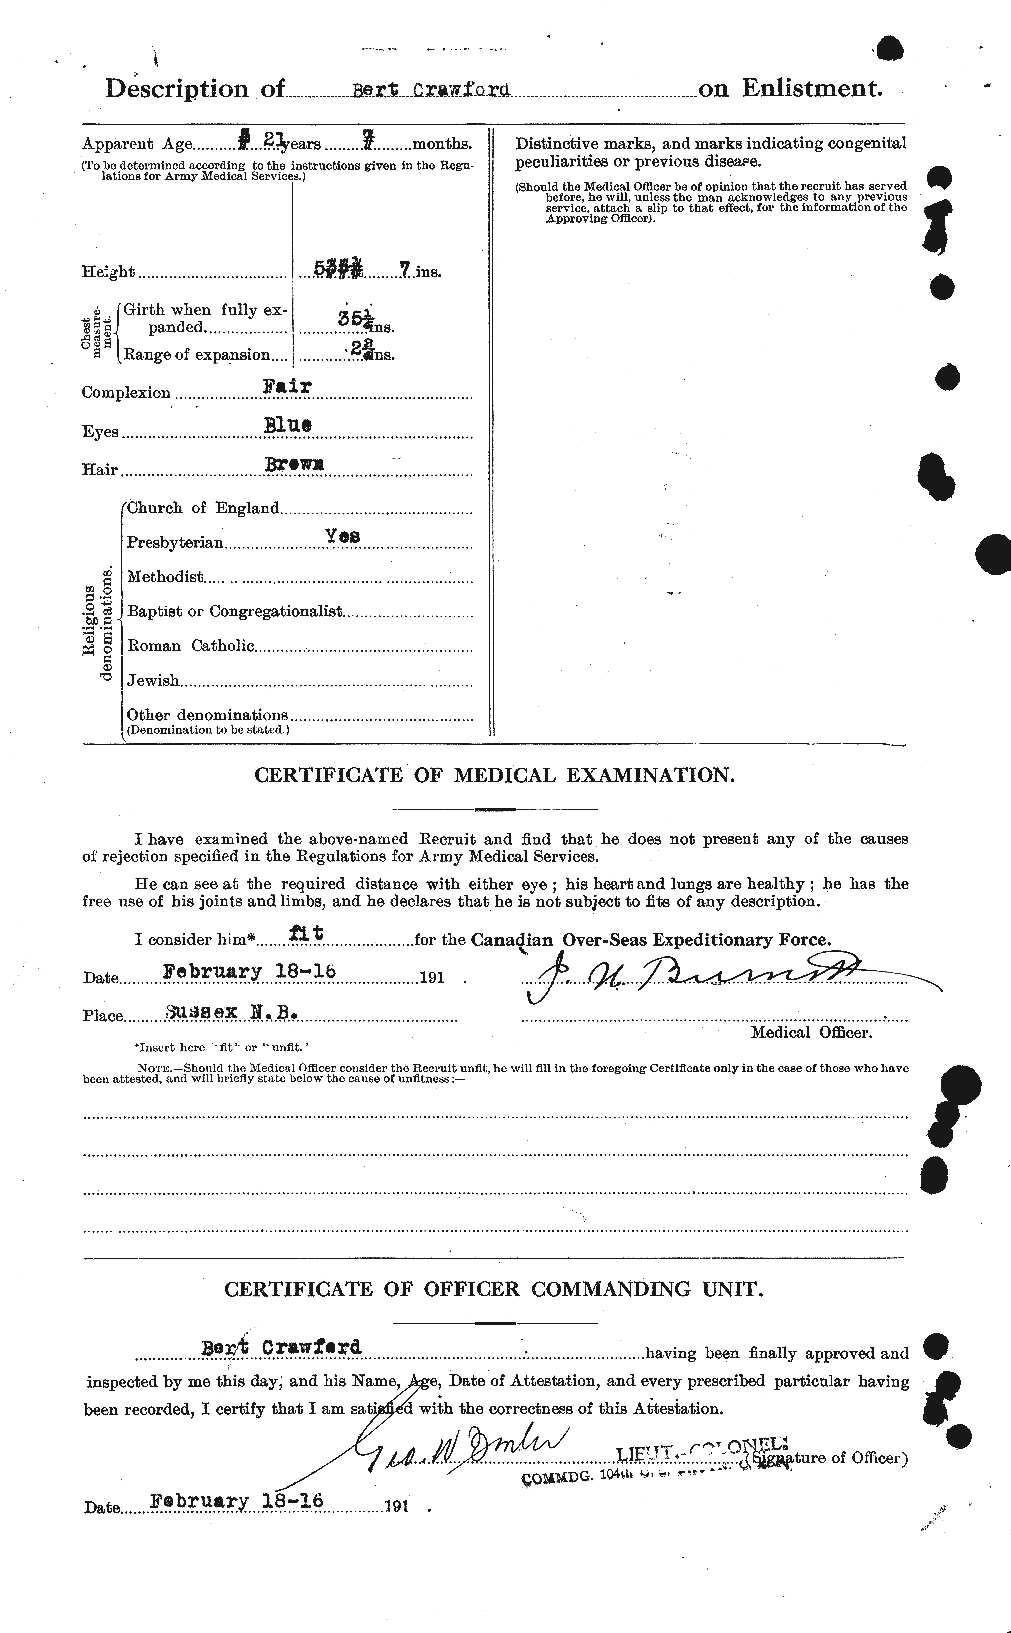 Personnel Records of the First World War - CEF 060919b